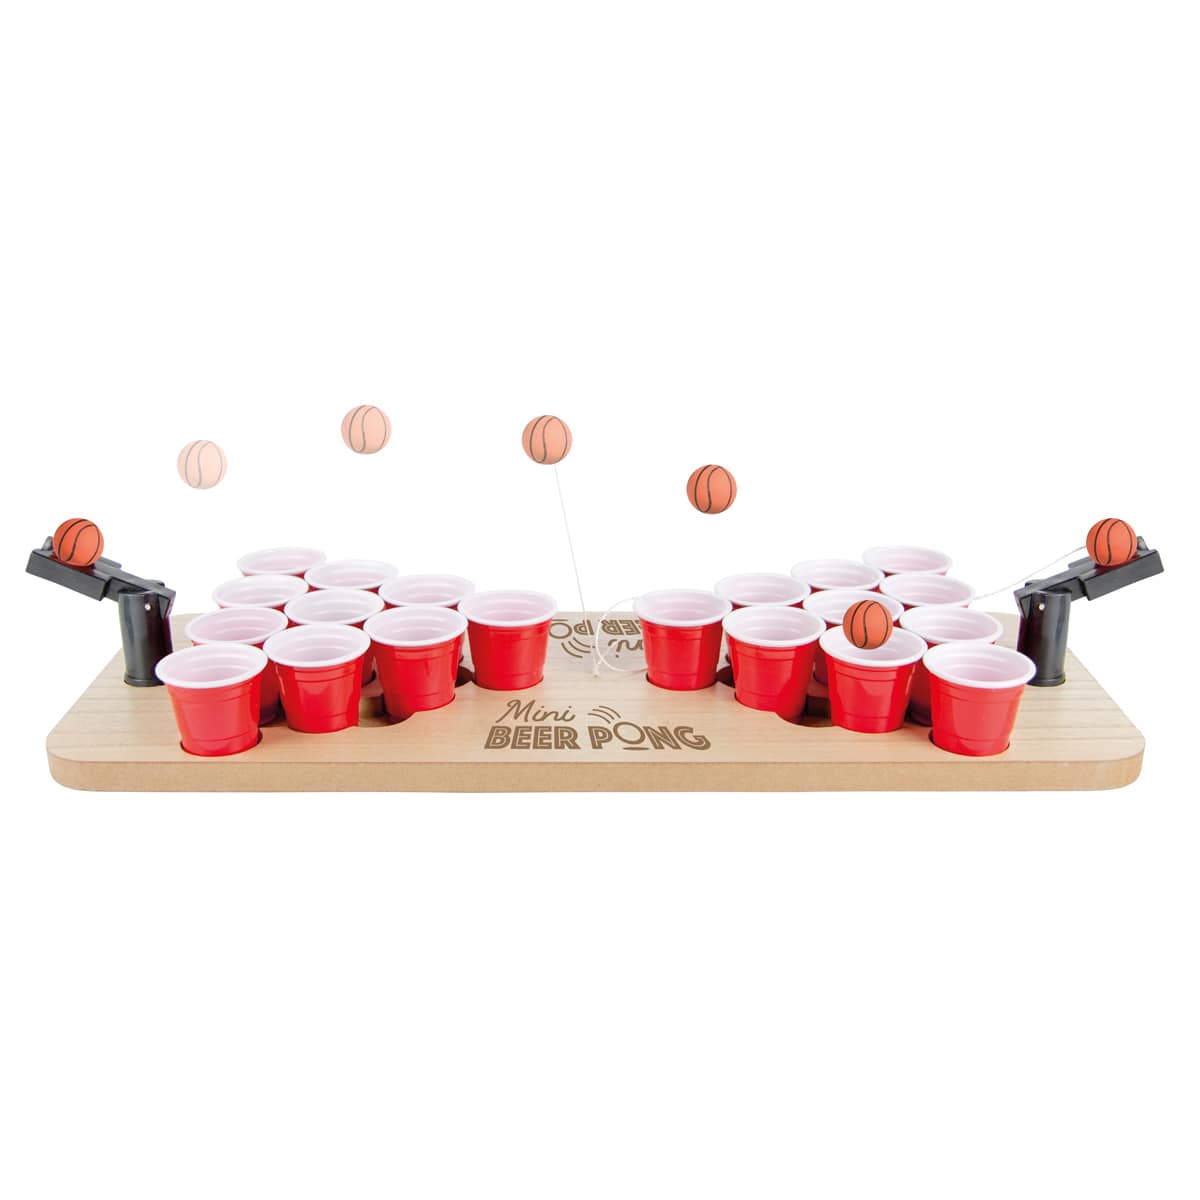 JEU A BOIRE BEER PONG CATAPULTE